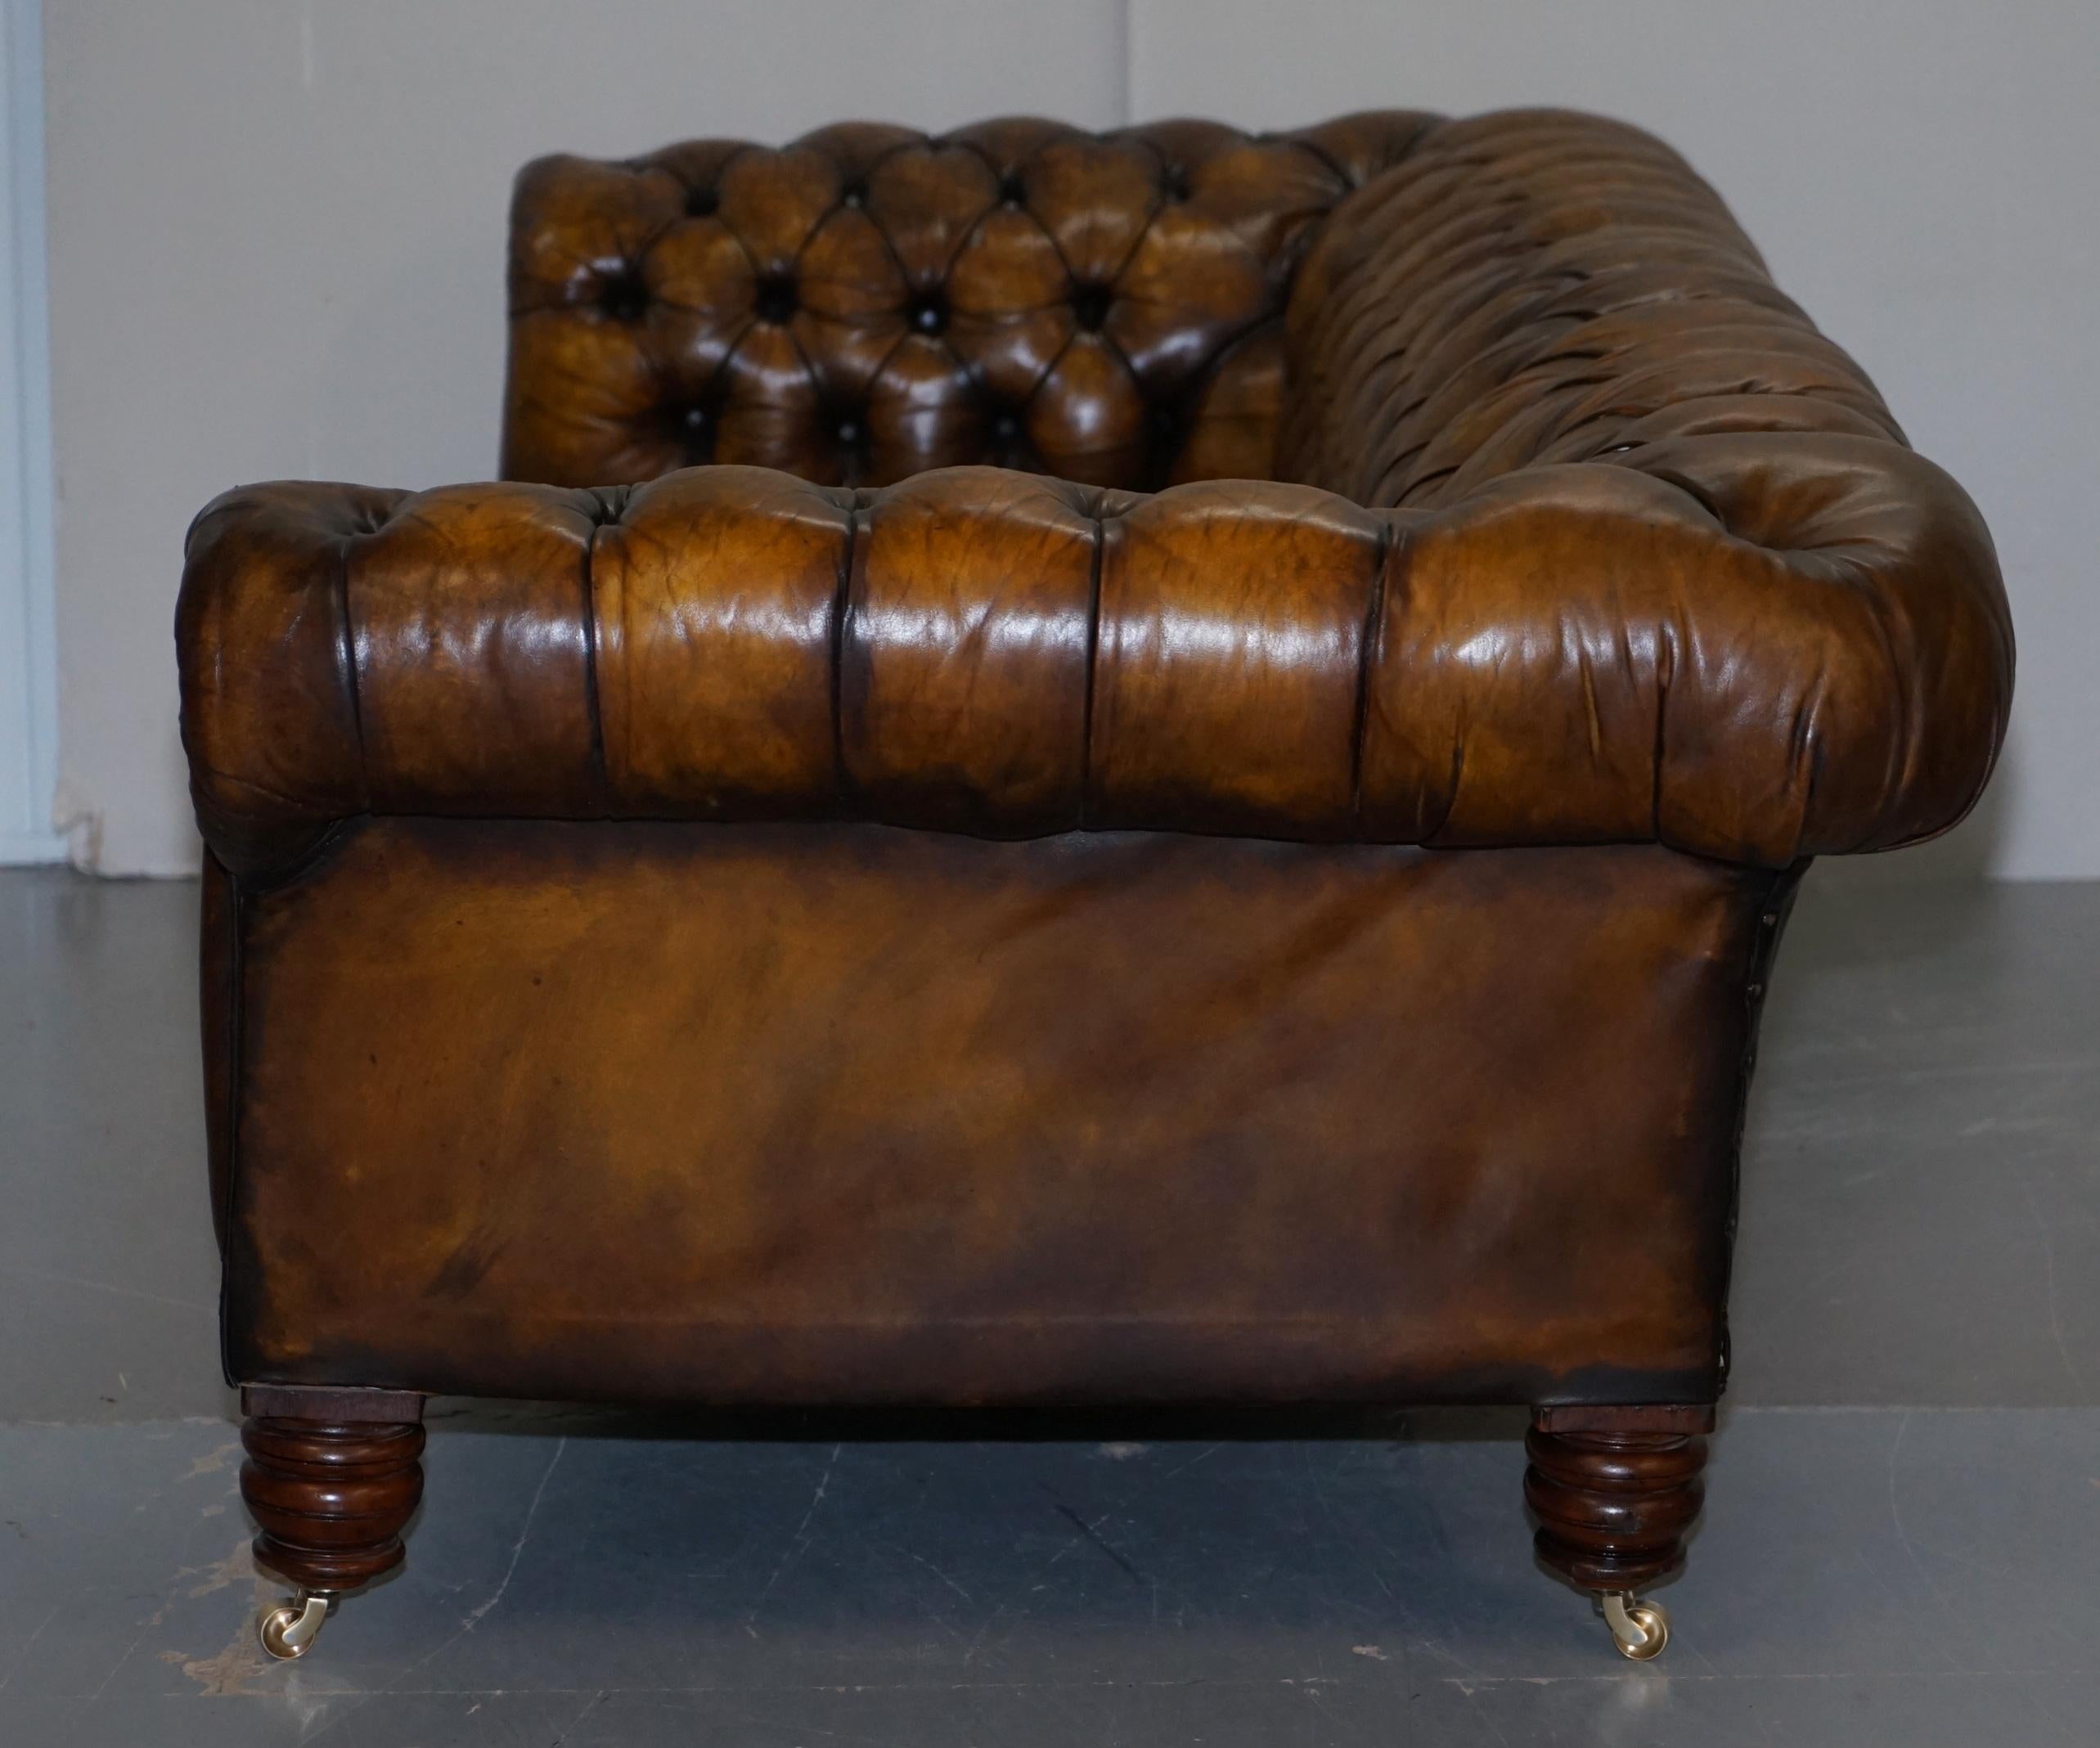 Huge Restored Victorian Chesterfield Brown Leather Sofa Horse Hair Coil Sprung 12